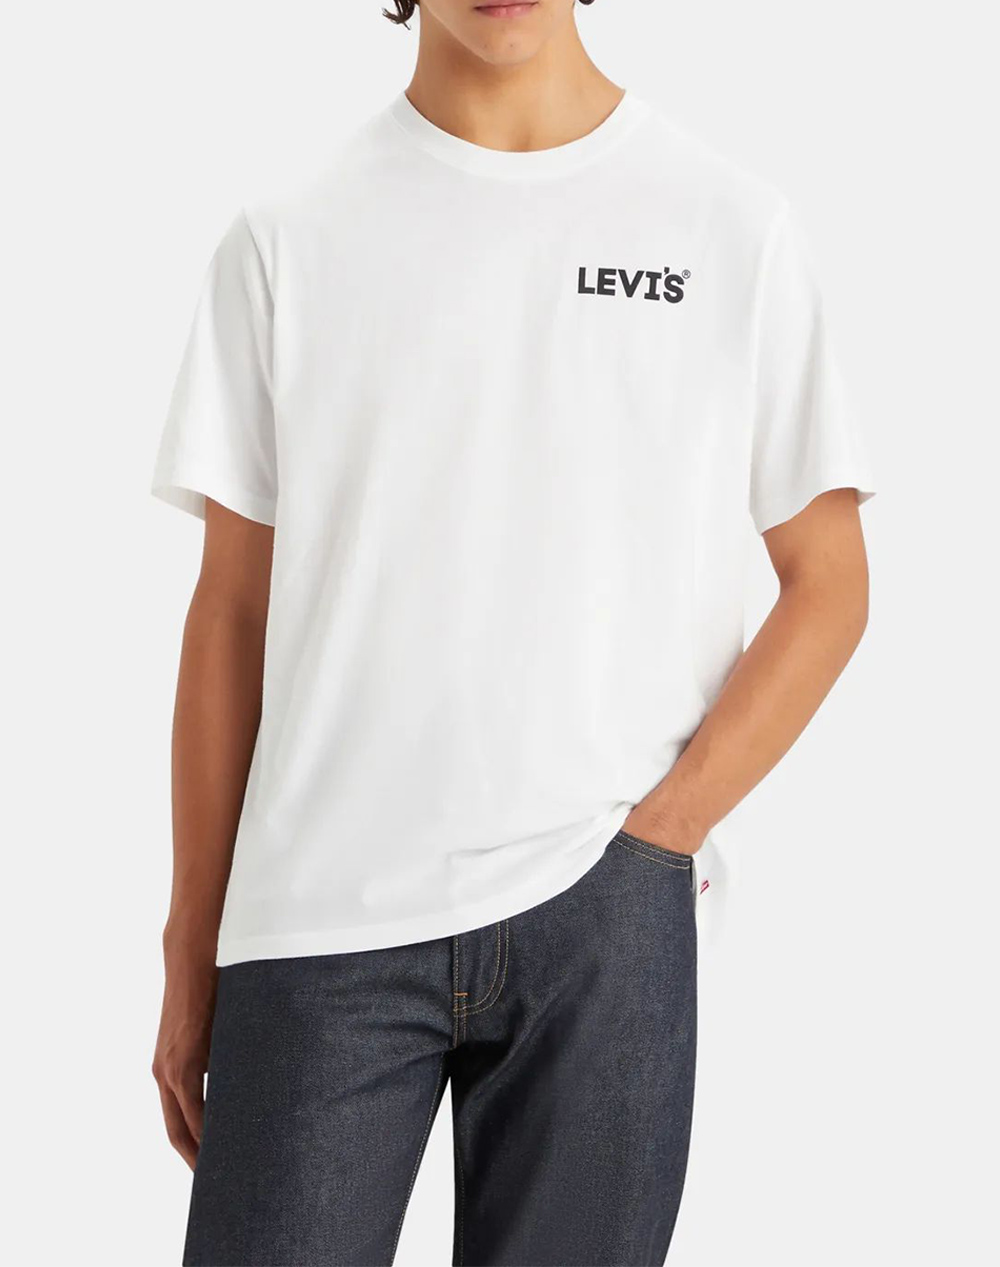 LEVIS RELAXED FIT TEE 16143-1427-1427 White 3820ALEVI3400192_XR27654